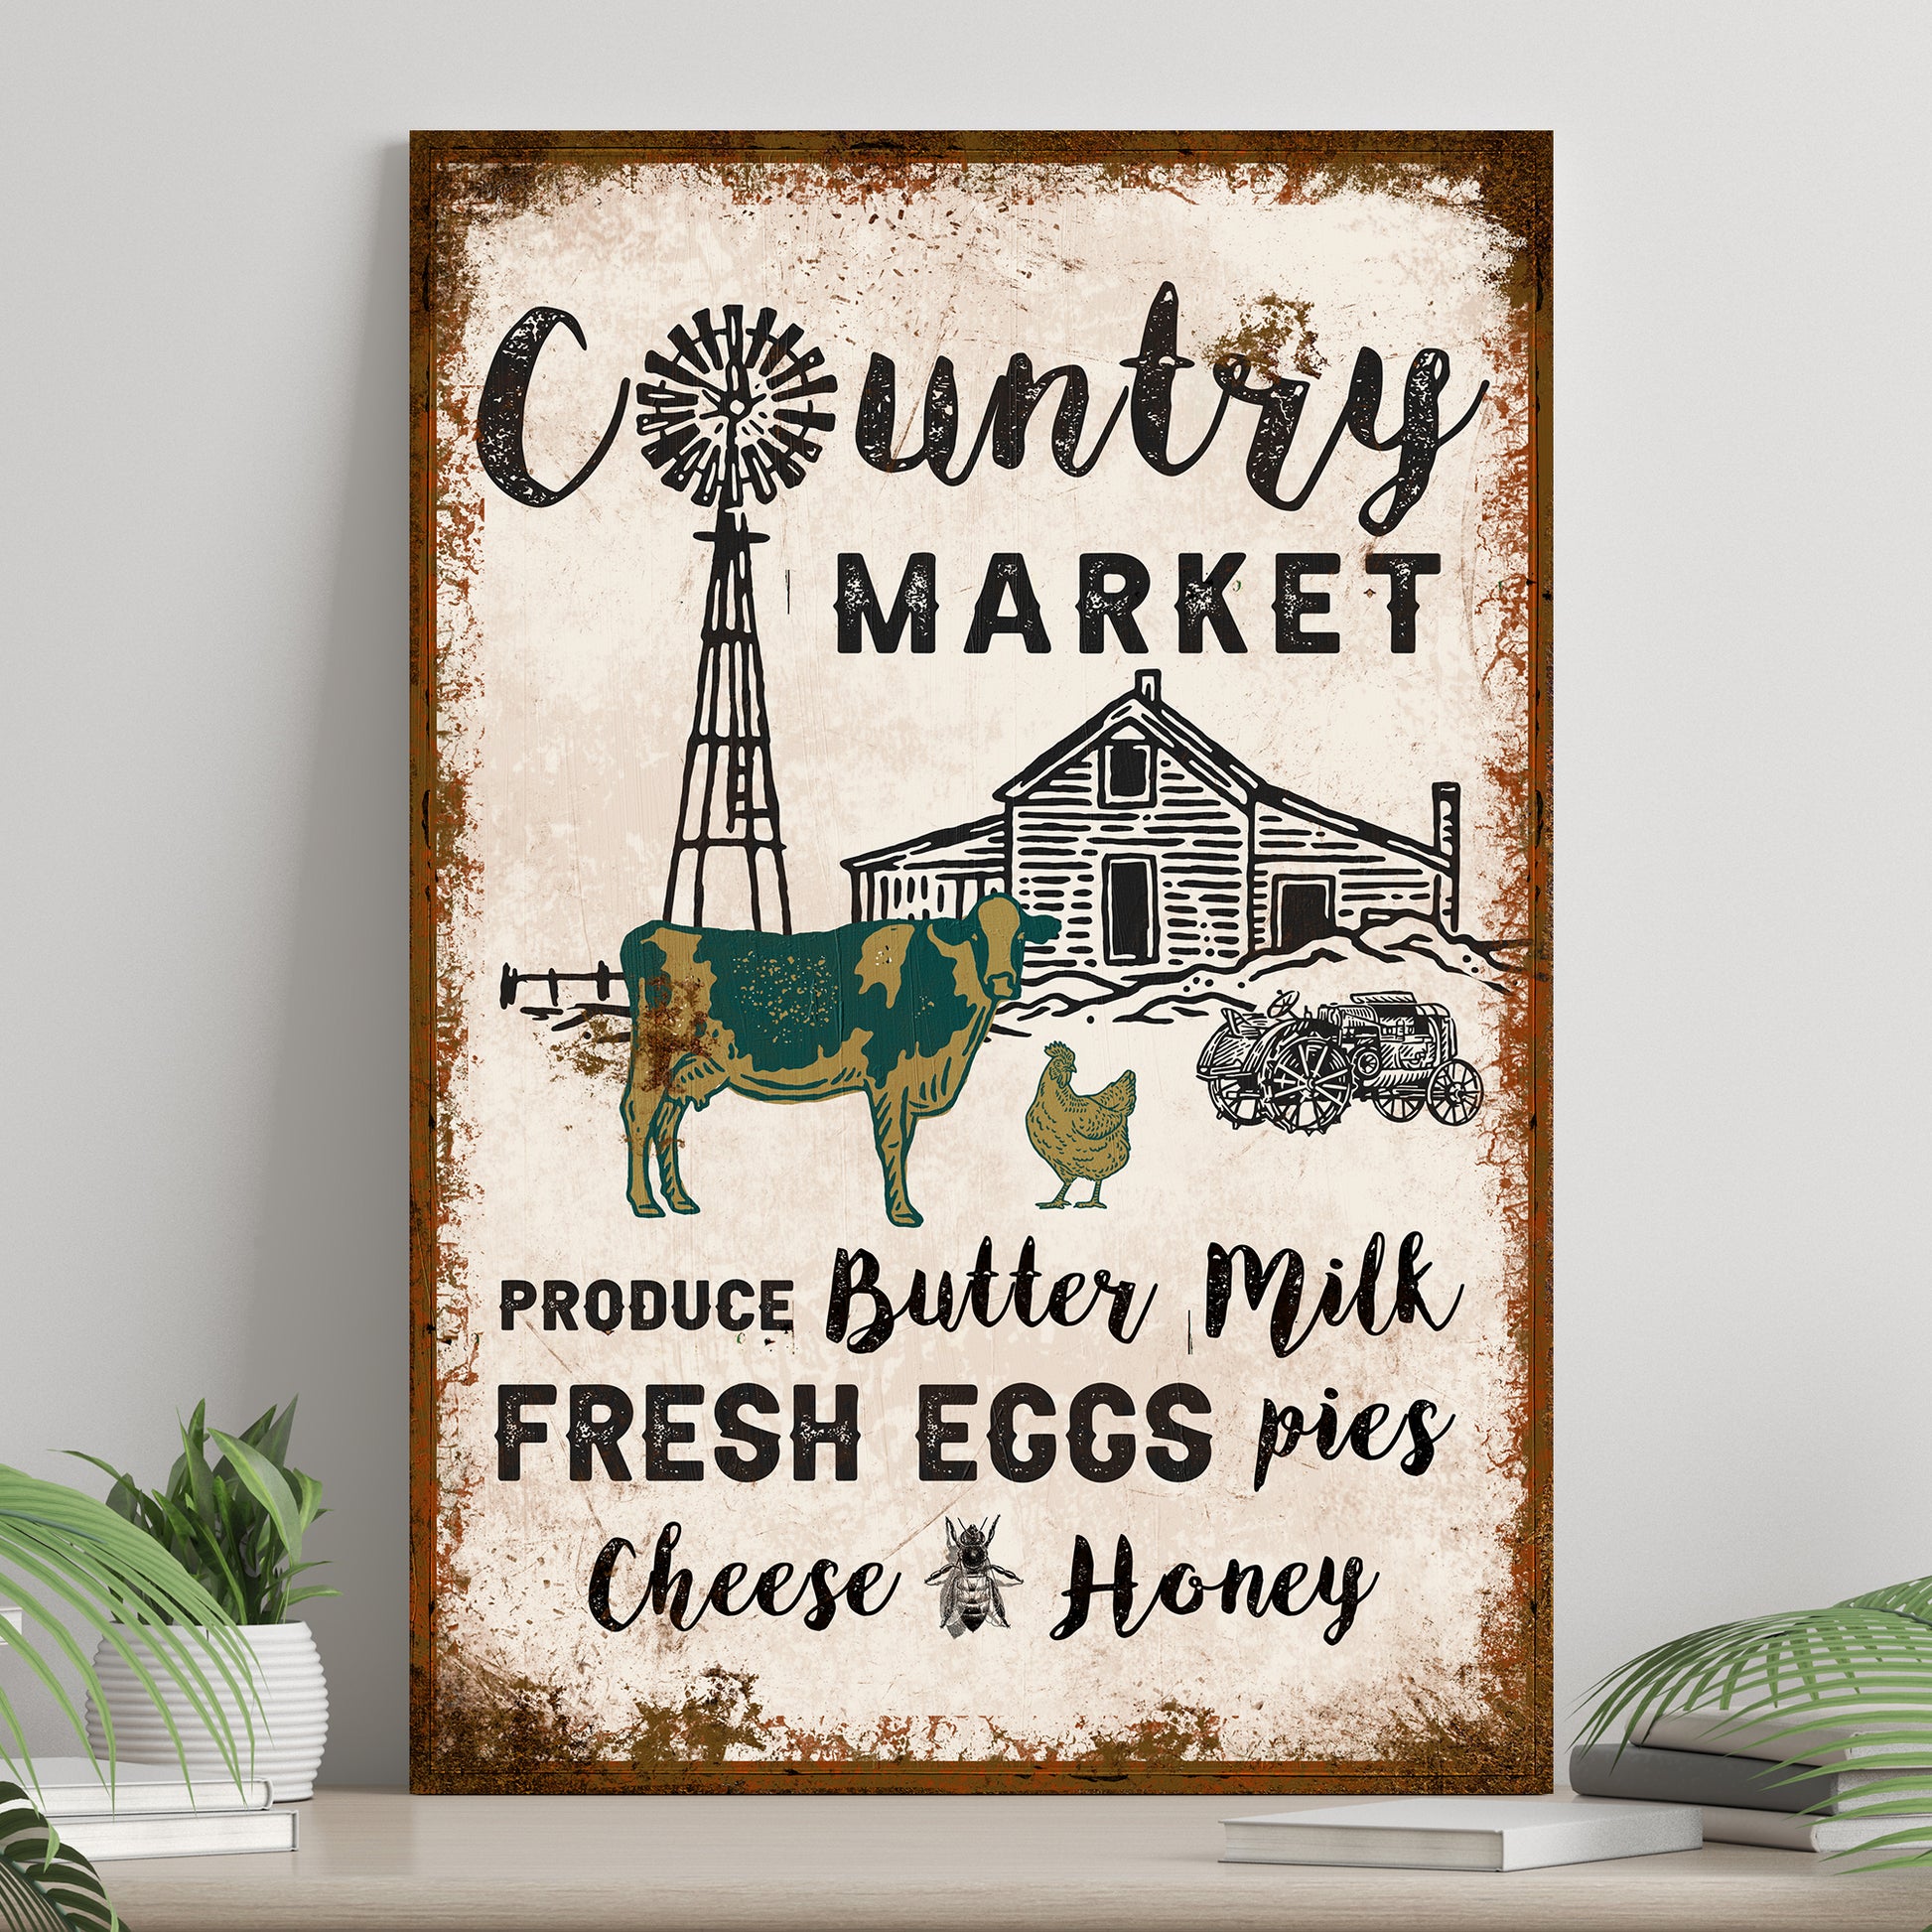 Country Market Sign - Image by Tailored Canvases